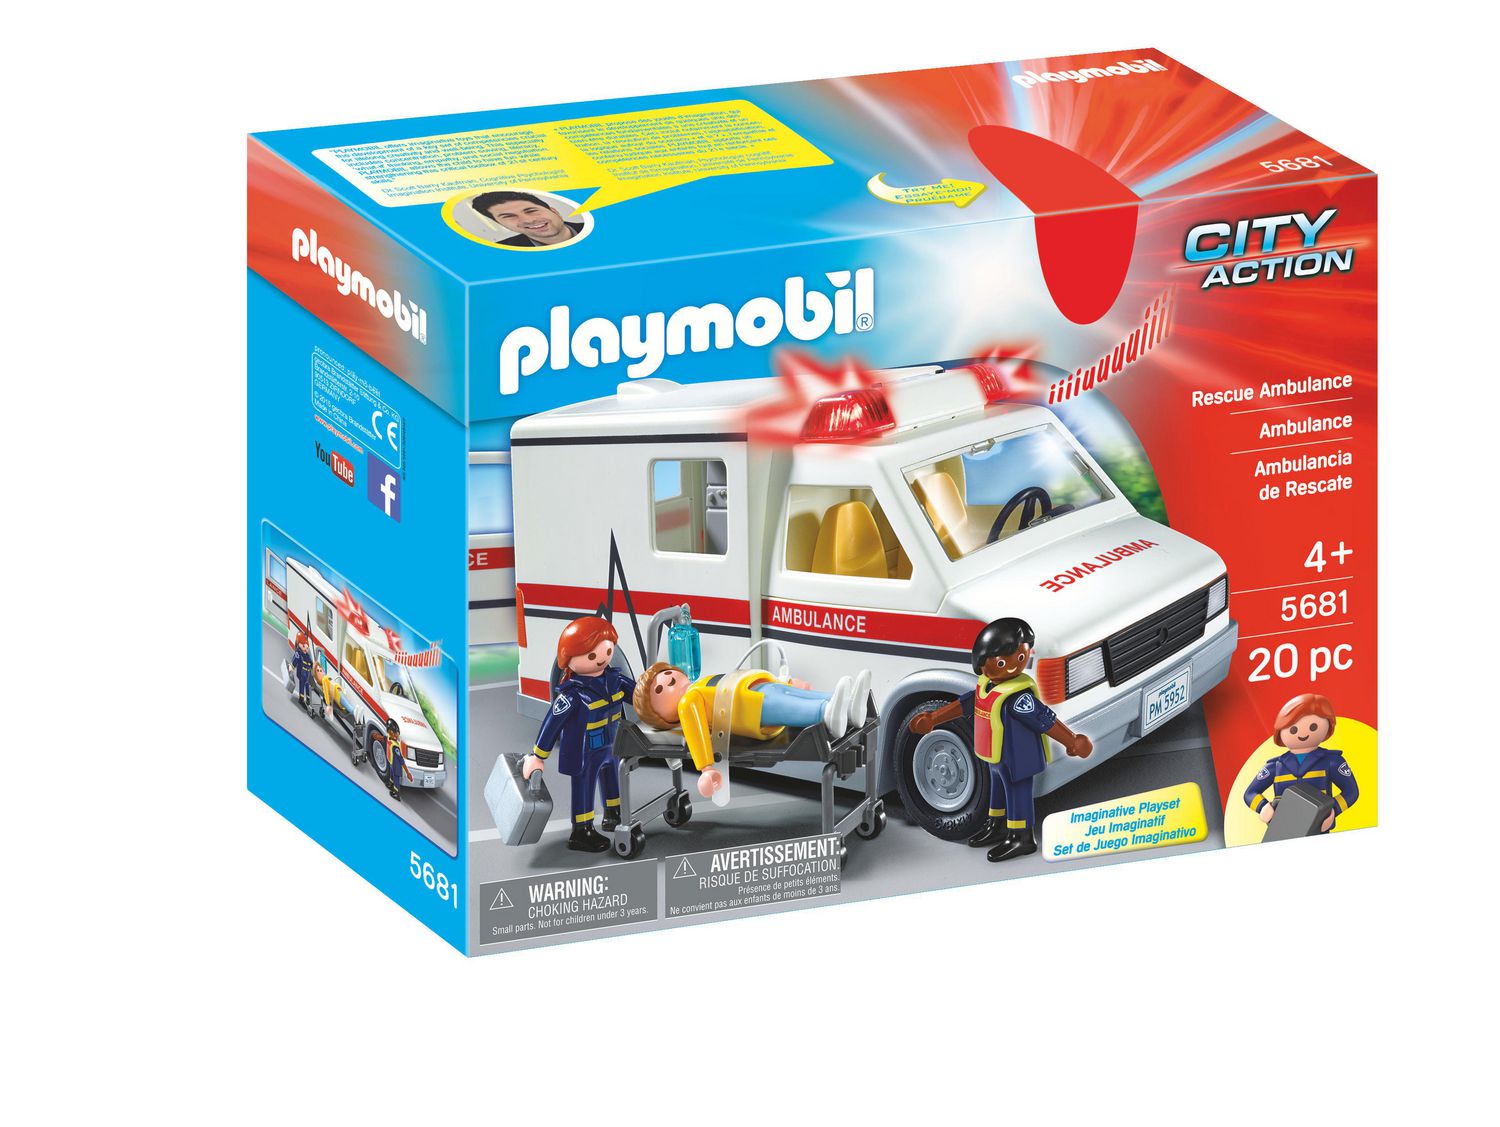 PLAYMOBIL Rescue Ambulance 5681 20pc with figures 